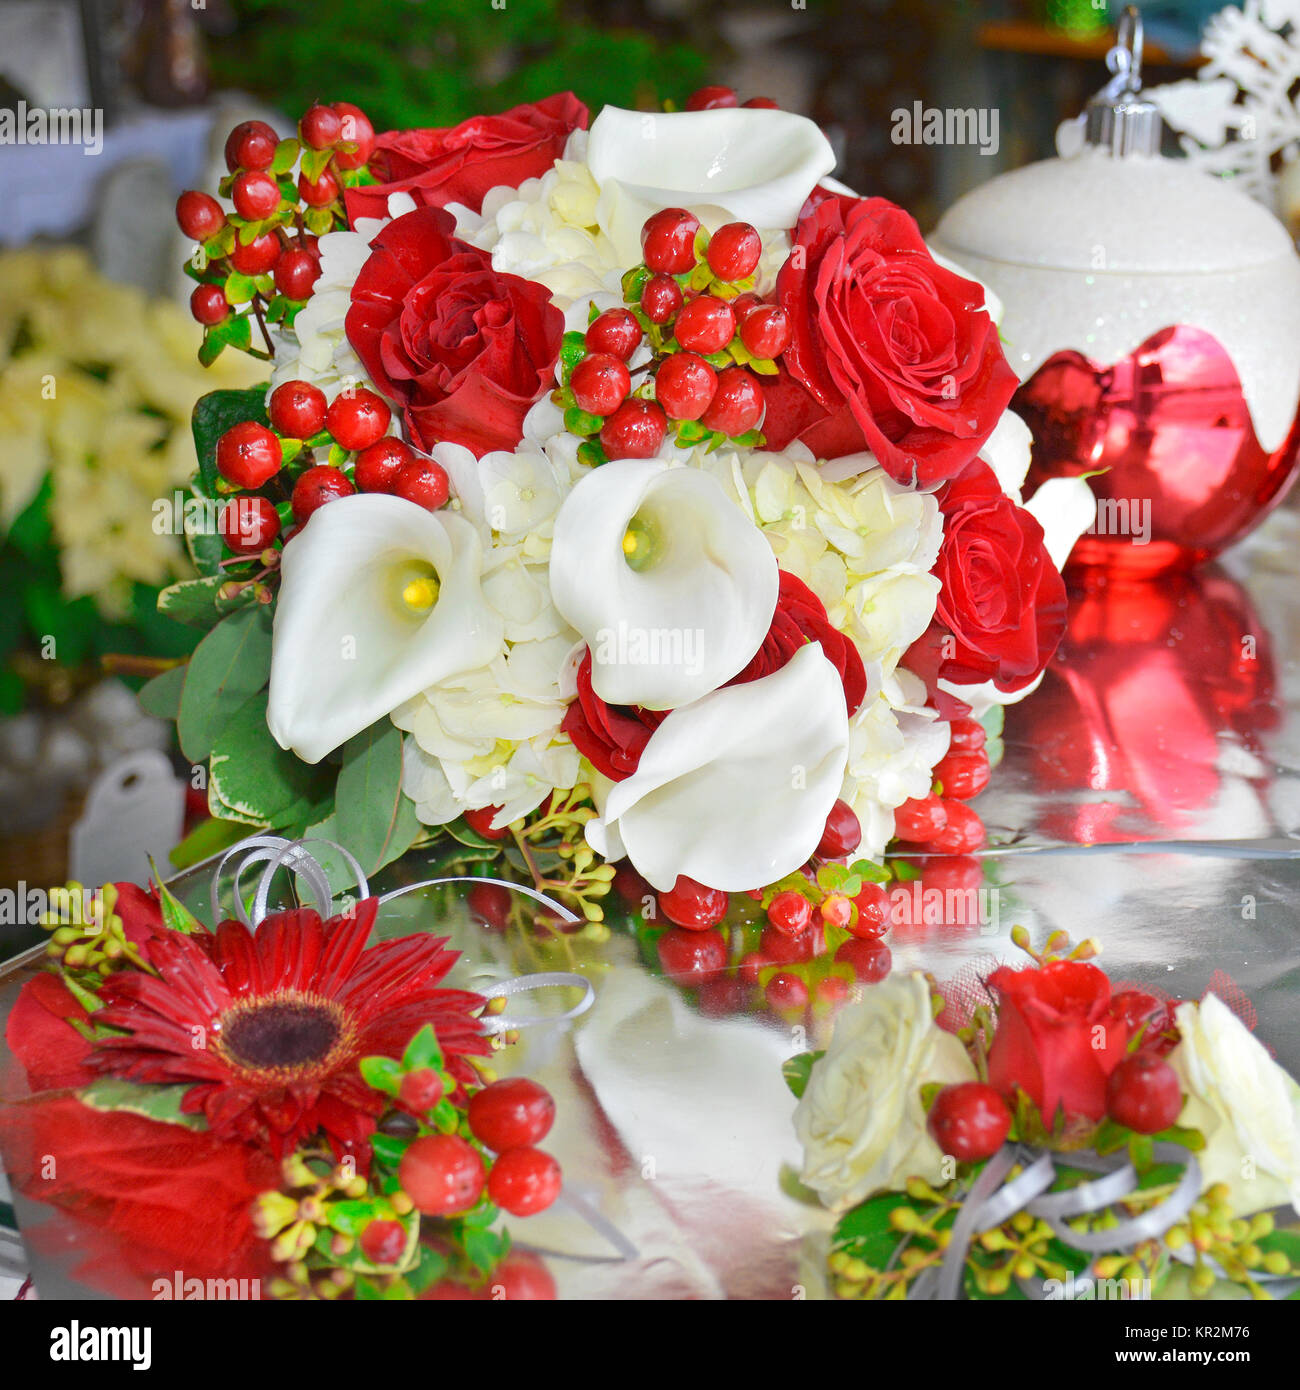 Photo of a holiday red and white bridal bouquet. Calla lilies, roses, hypericum berries, hydrangea and gerbera dasies are also available year-round. Stock Photo